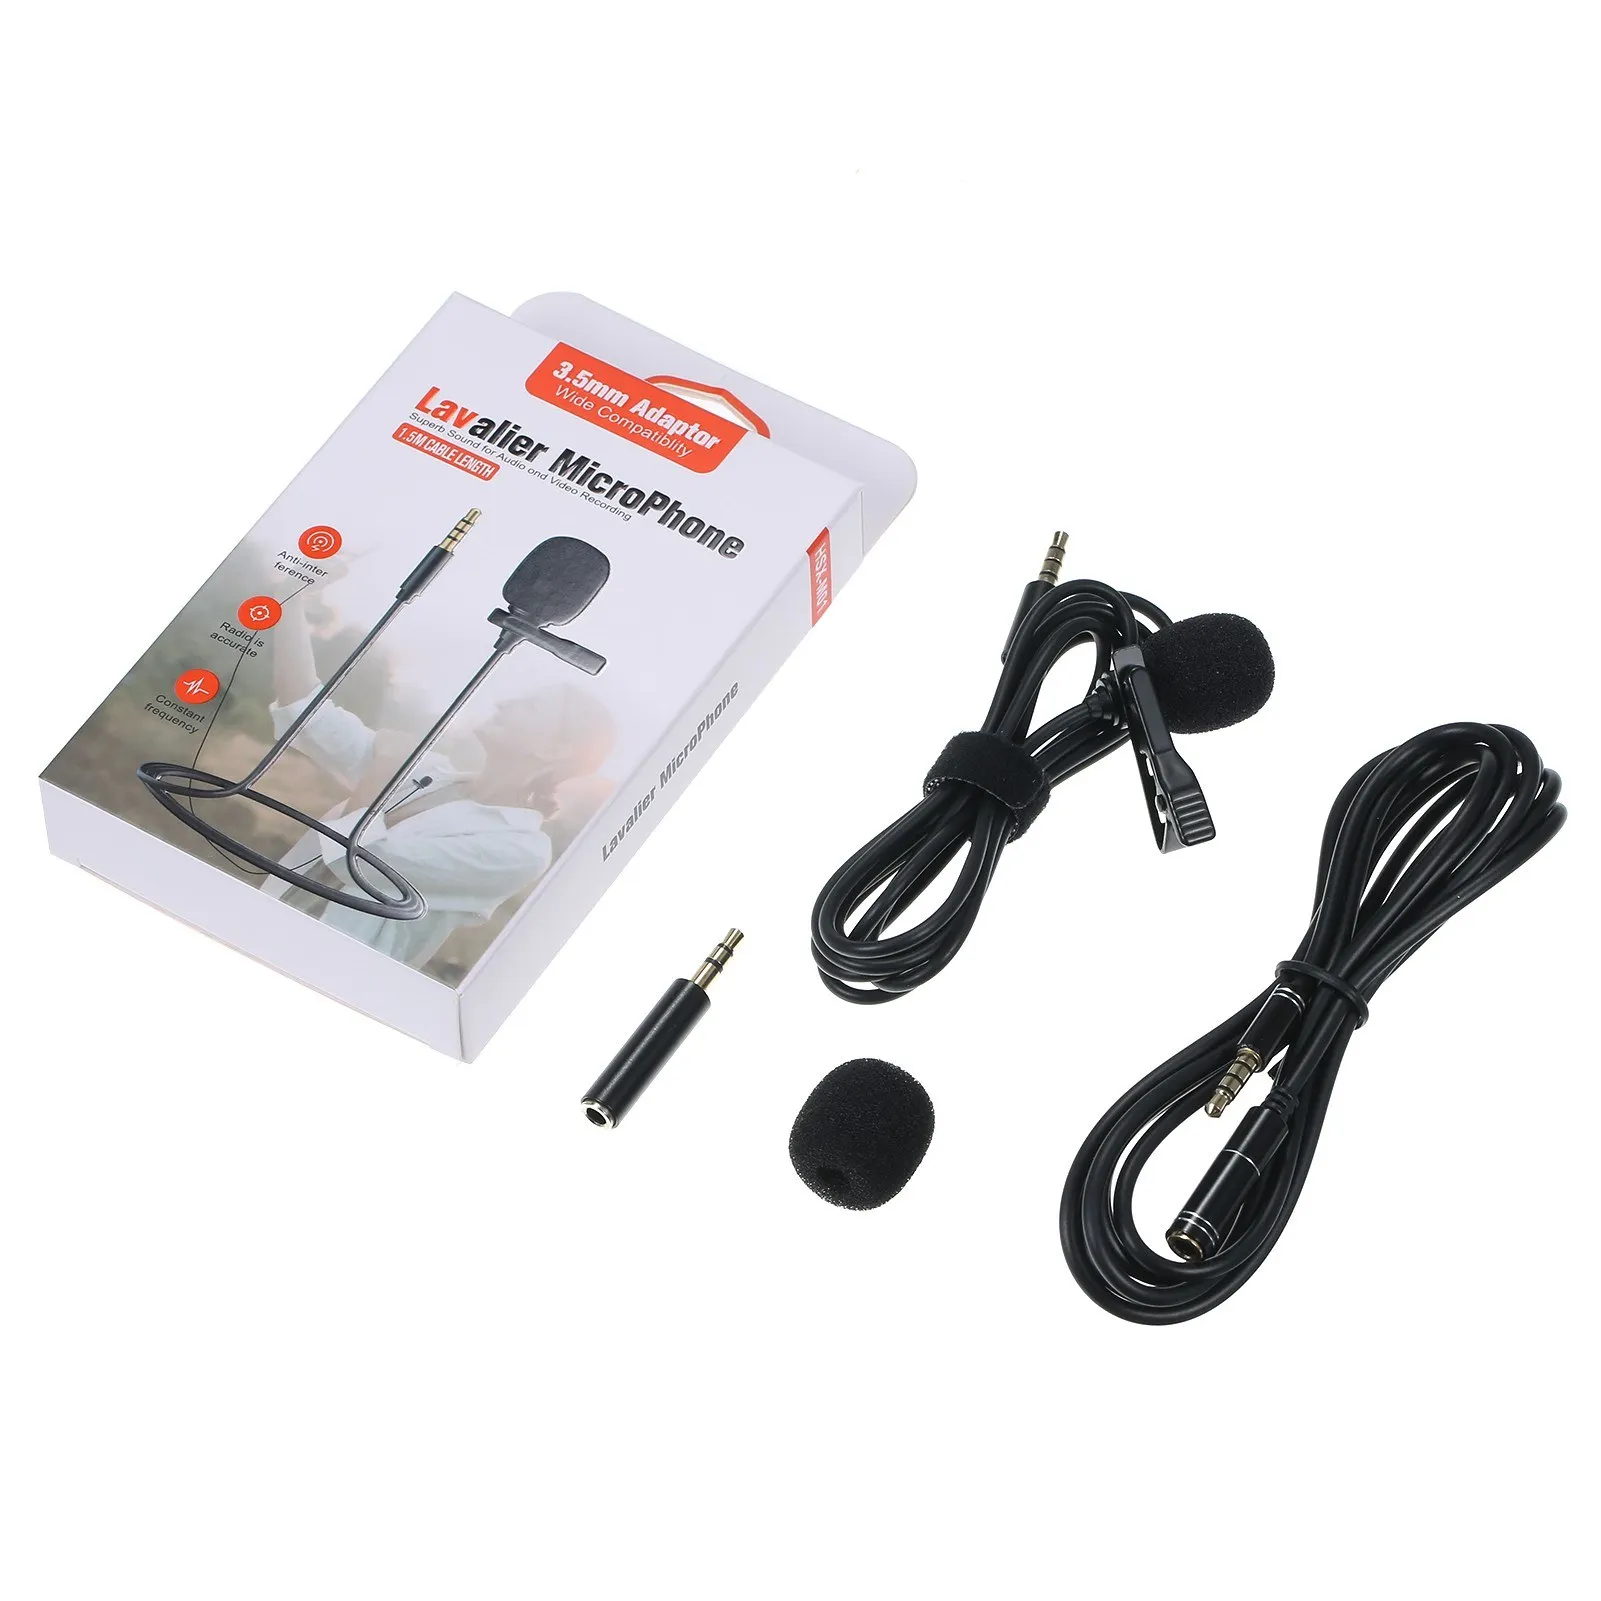 Lavalier Microphone for SLR Interview, Conference Recording, and Video Blog